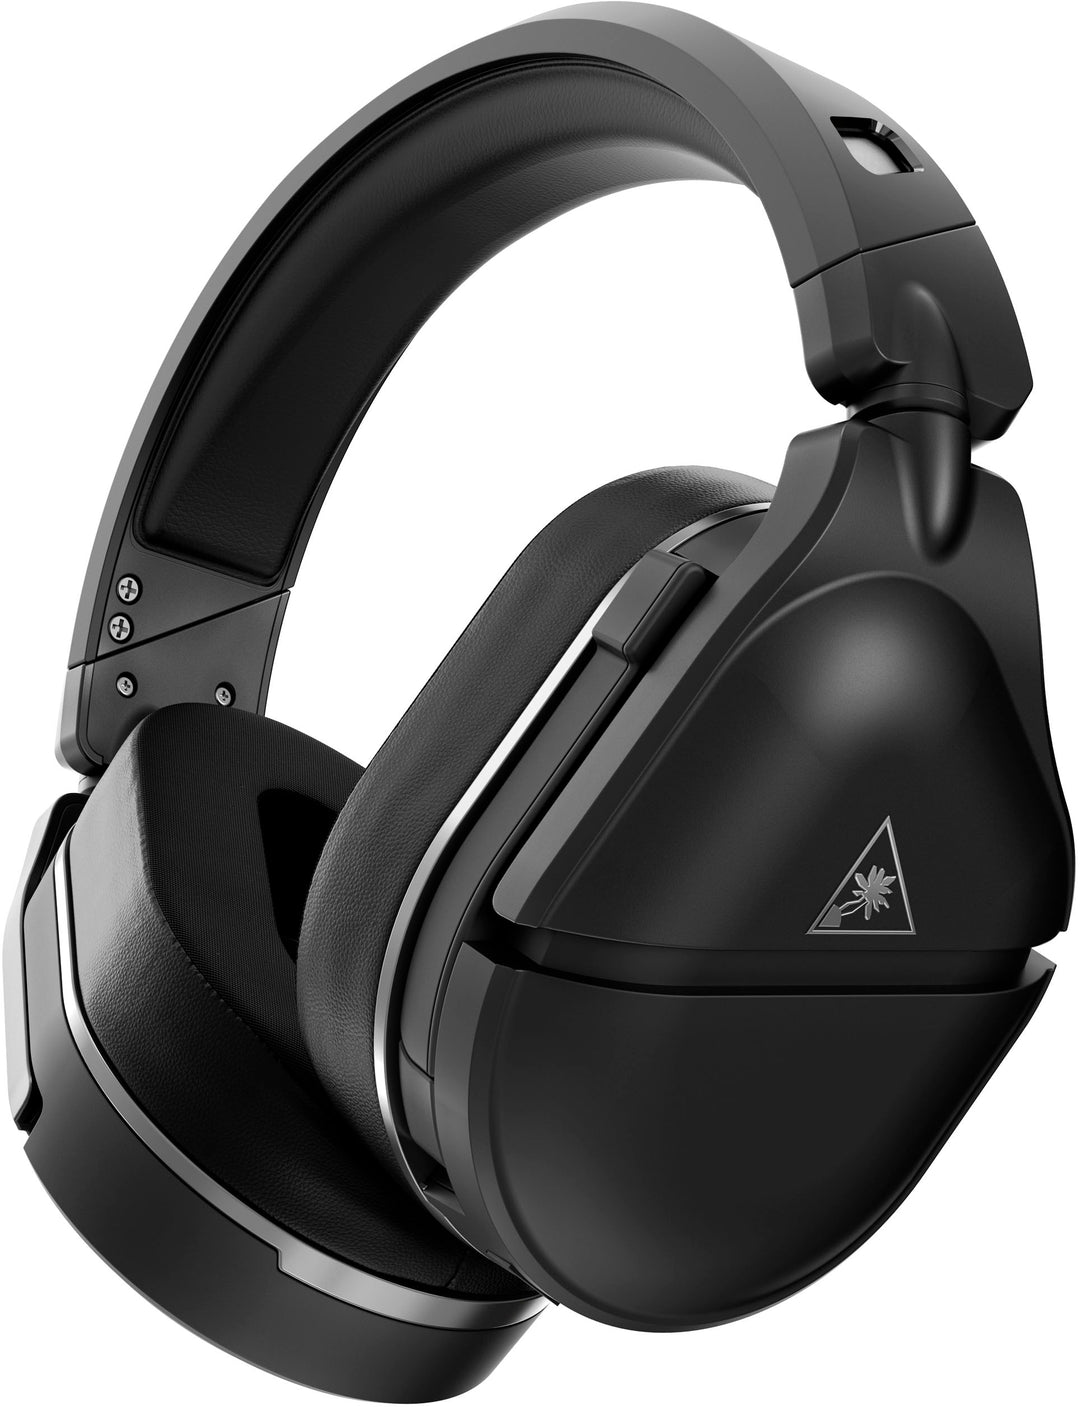 Turtle Beach - Stealth 700 Gen 2 MAX PS Wireless Multiplatform Gaming Headset for PS5, PS4, Nintendo Switch, PC - 40+ Hour Battery - Black_1